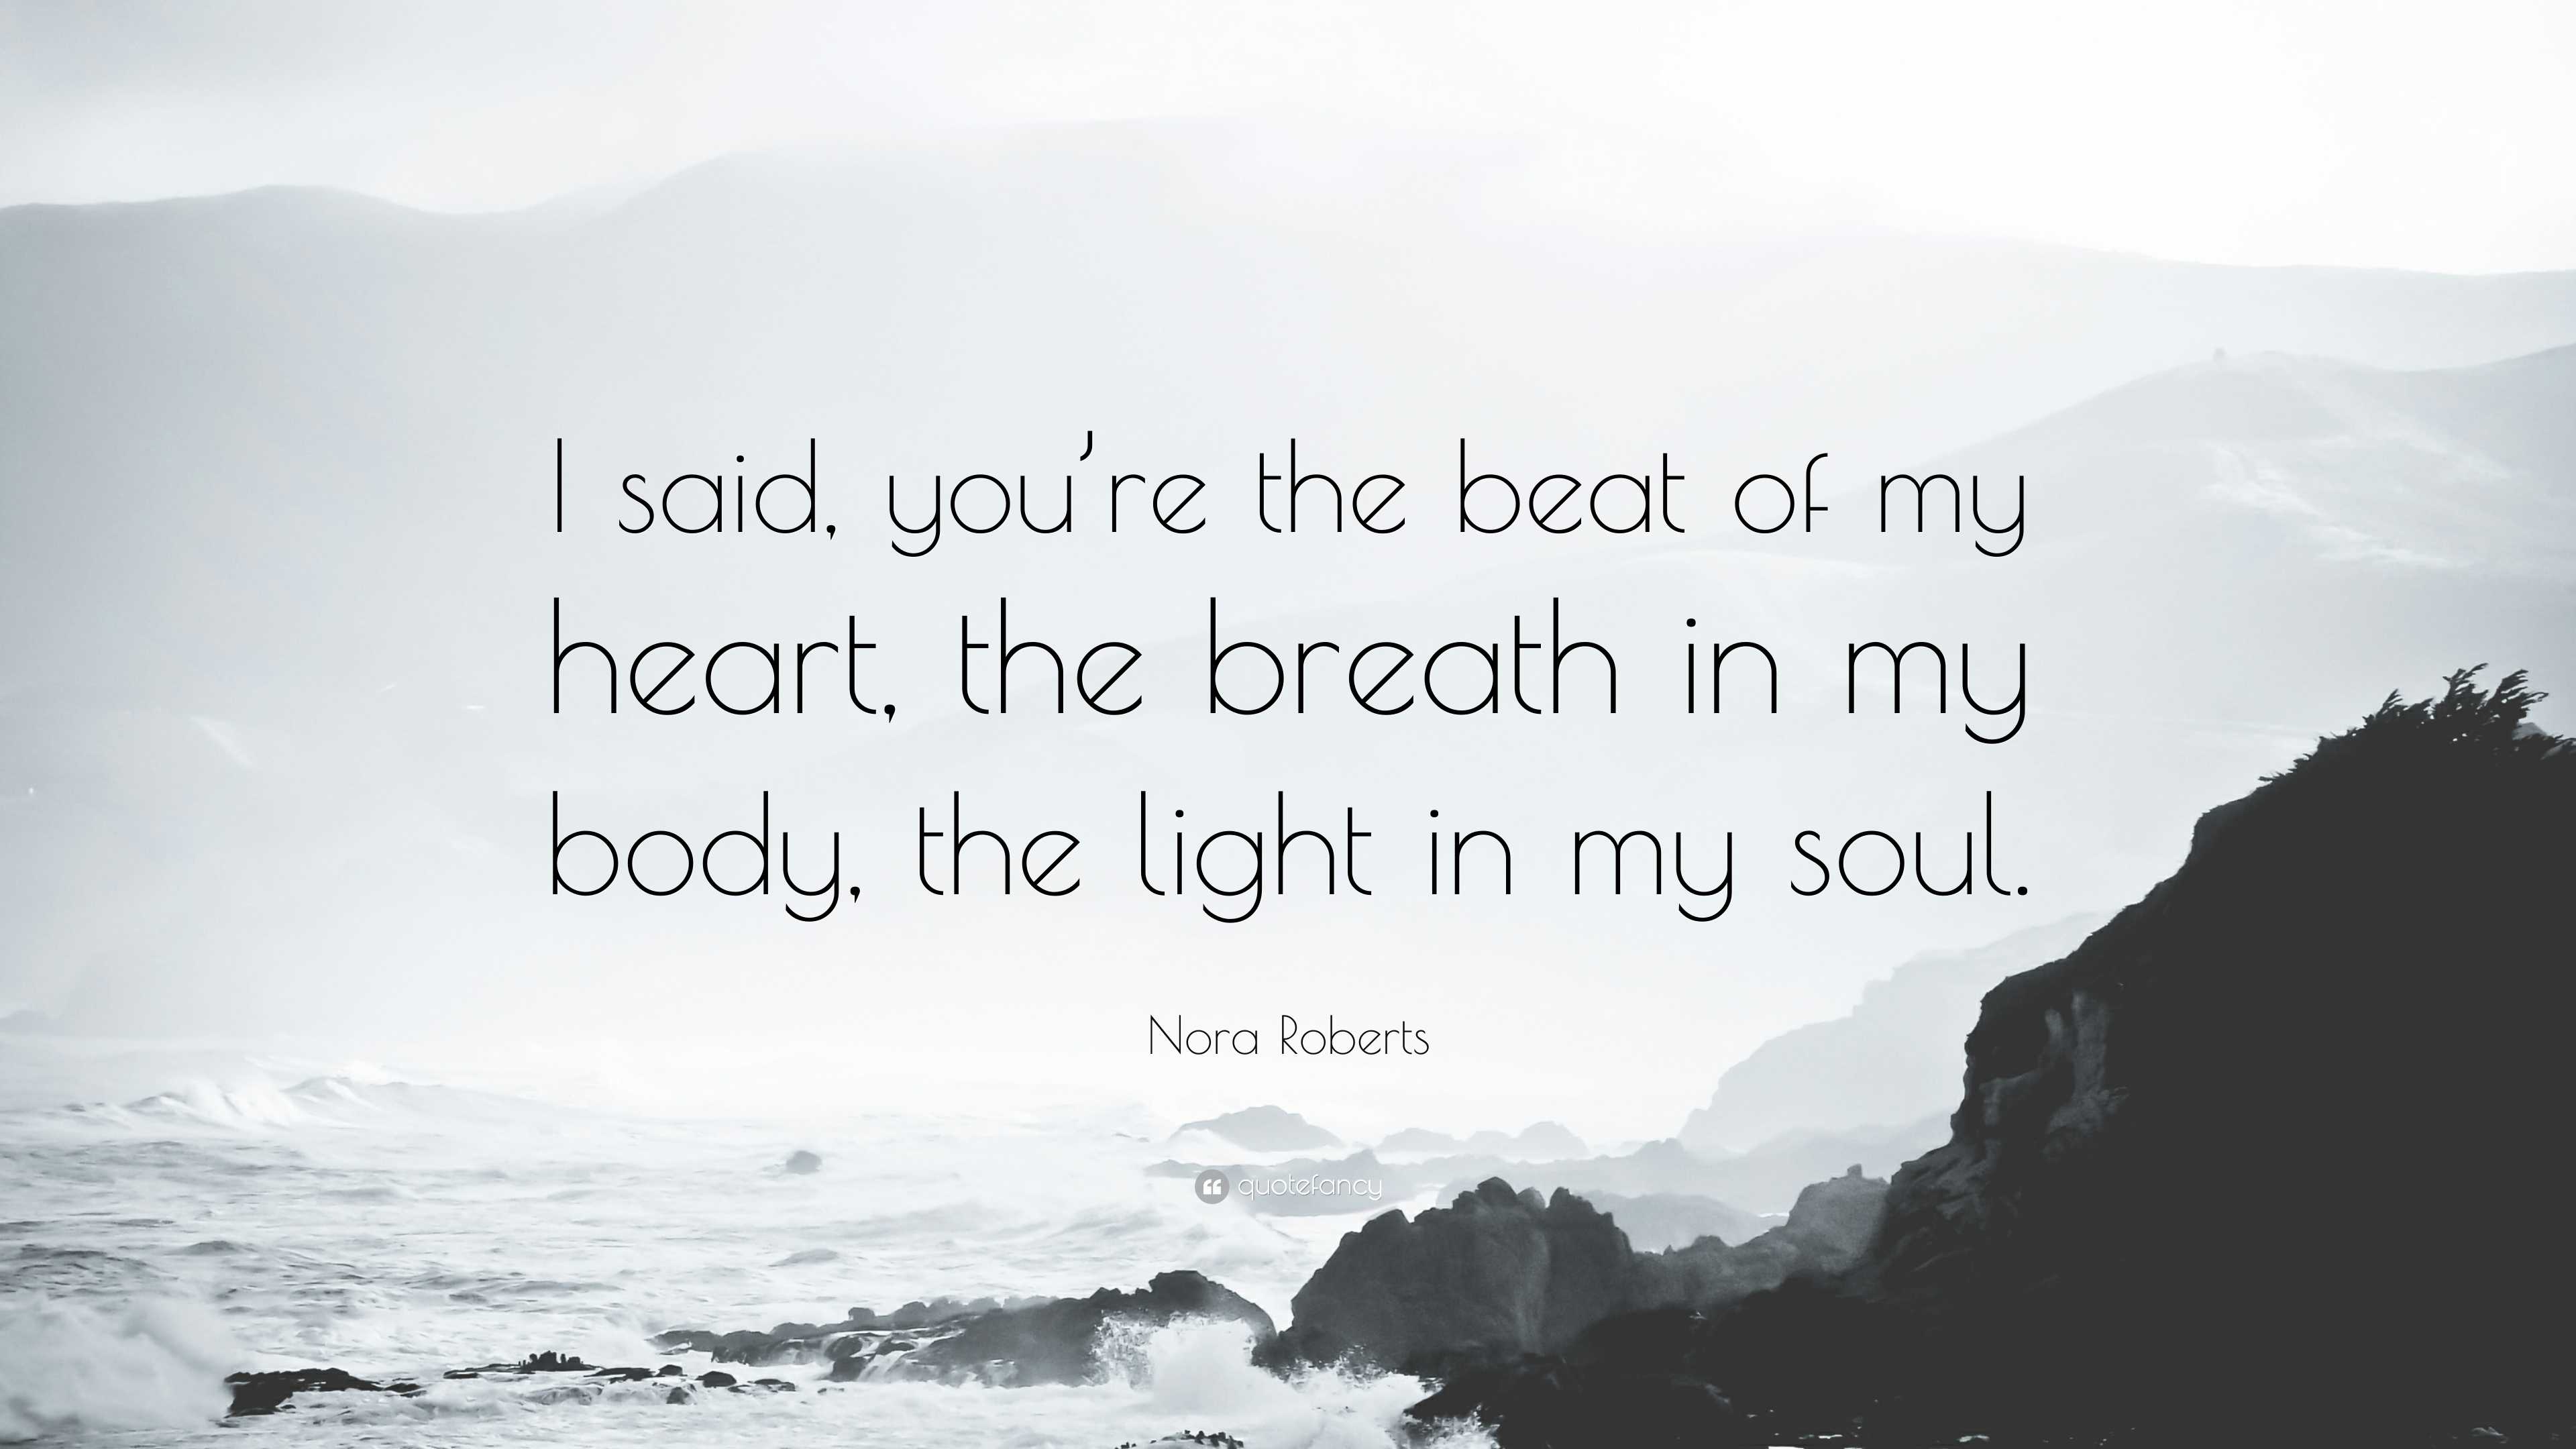 Nora Roberts Quote: “I said, you're the beat of my heart, the breath in my